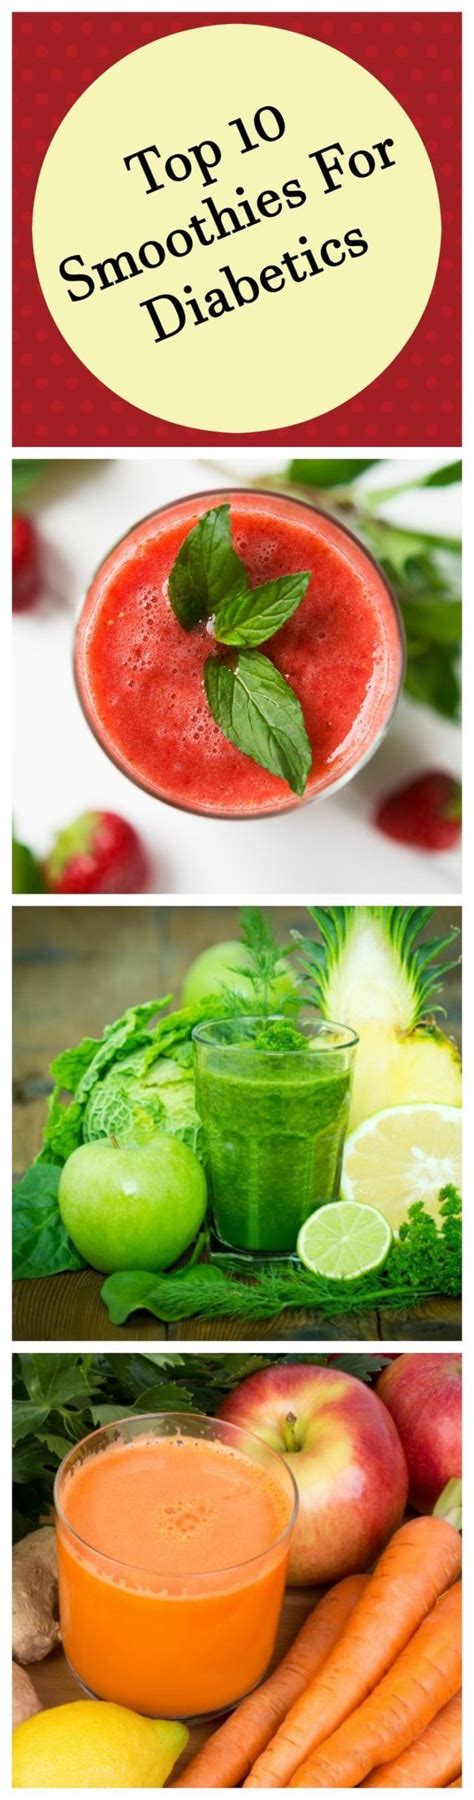 Aim for a healthy weight. Top 10 Smoothies For Diabetics in 2020 | Diabetic smoothie ...